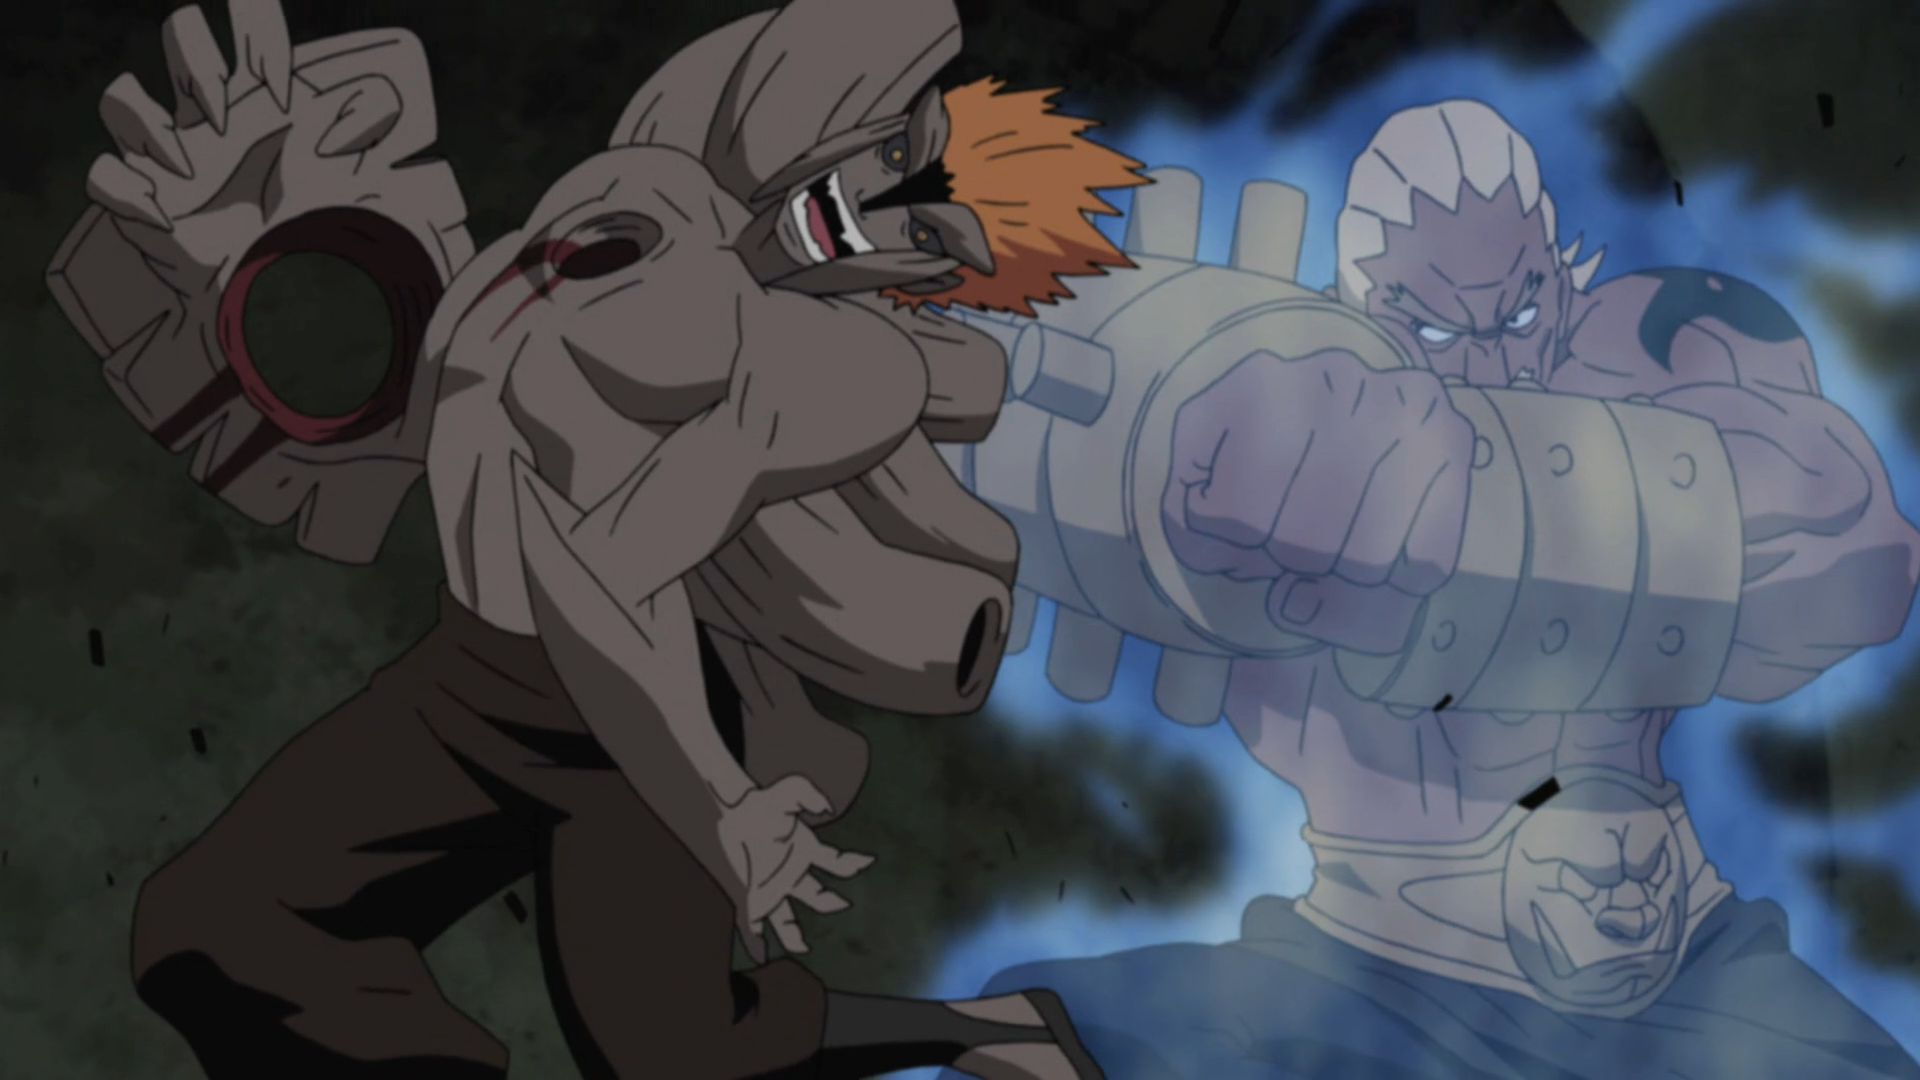 http://vignette2.wikia.nocookie.net/naruto/images/3/30/Raikage_Elbow.png/revision/latest?cb=20150214192626